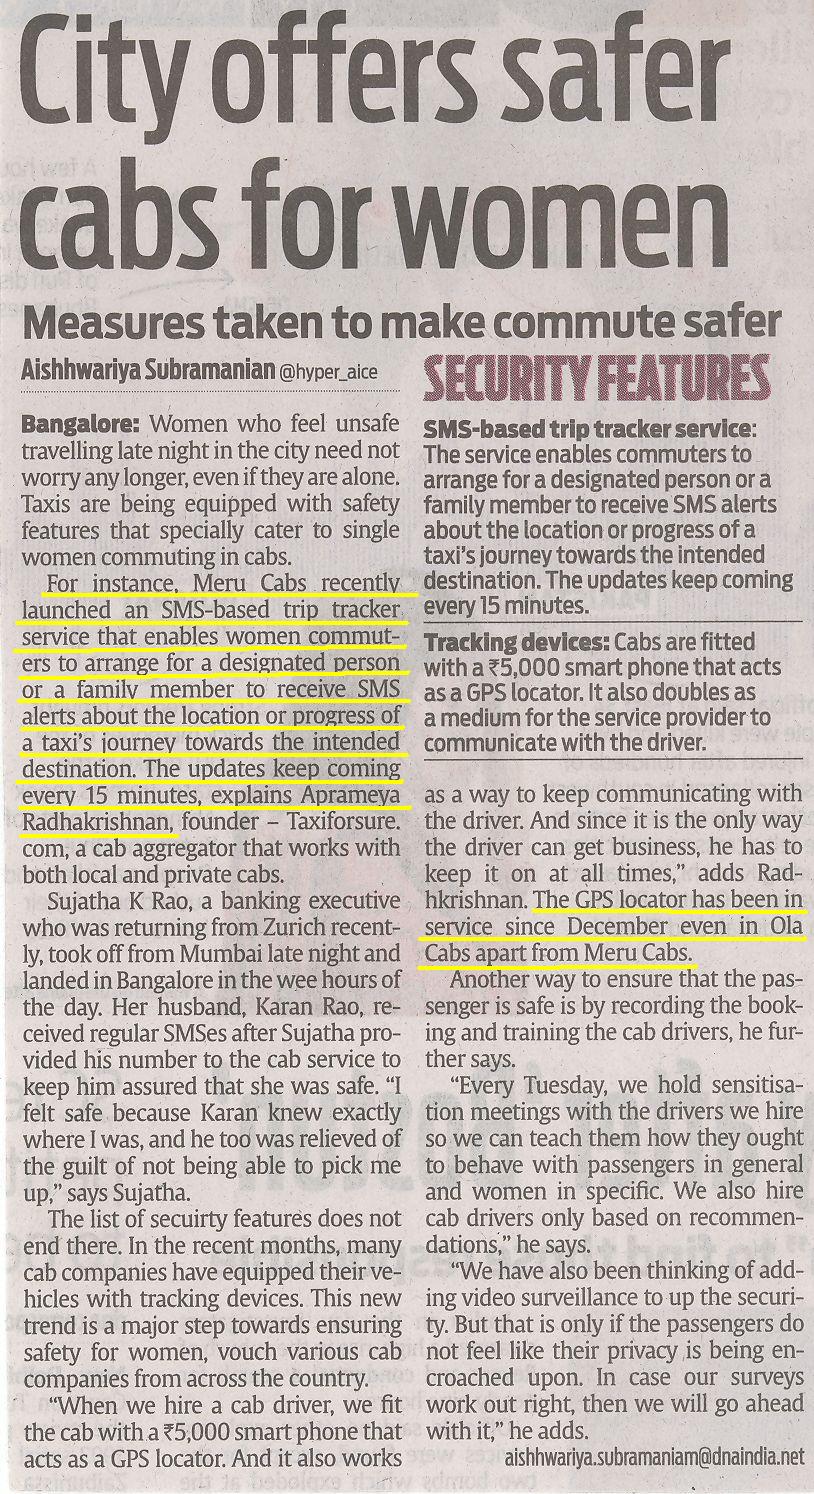 DNA Bangalore - City offers safer cabs for women